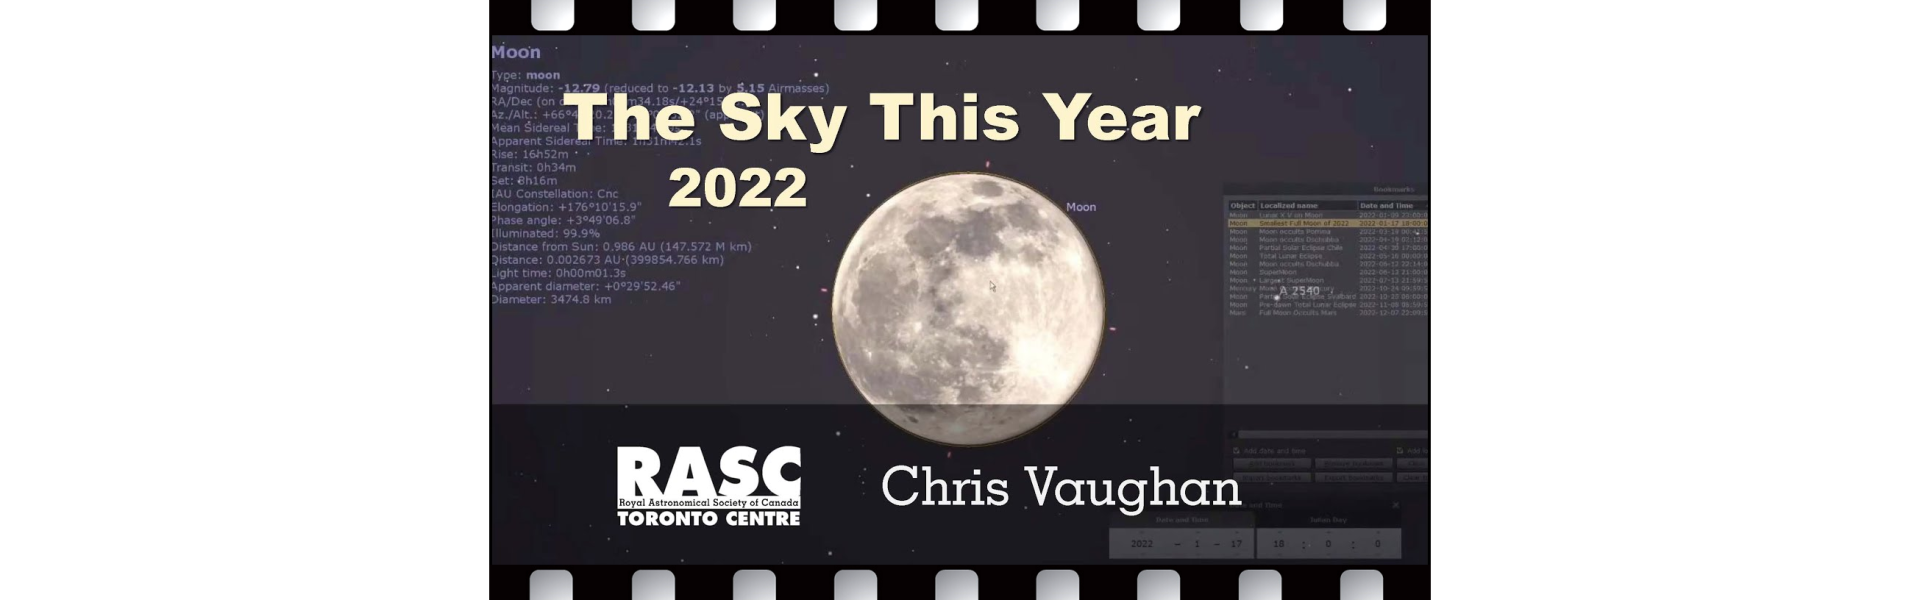 The Sky This Year 2022